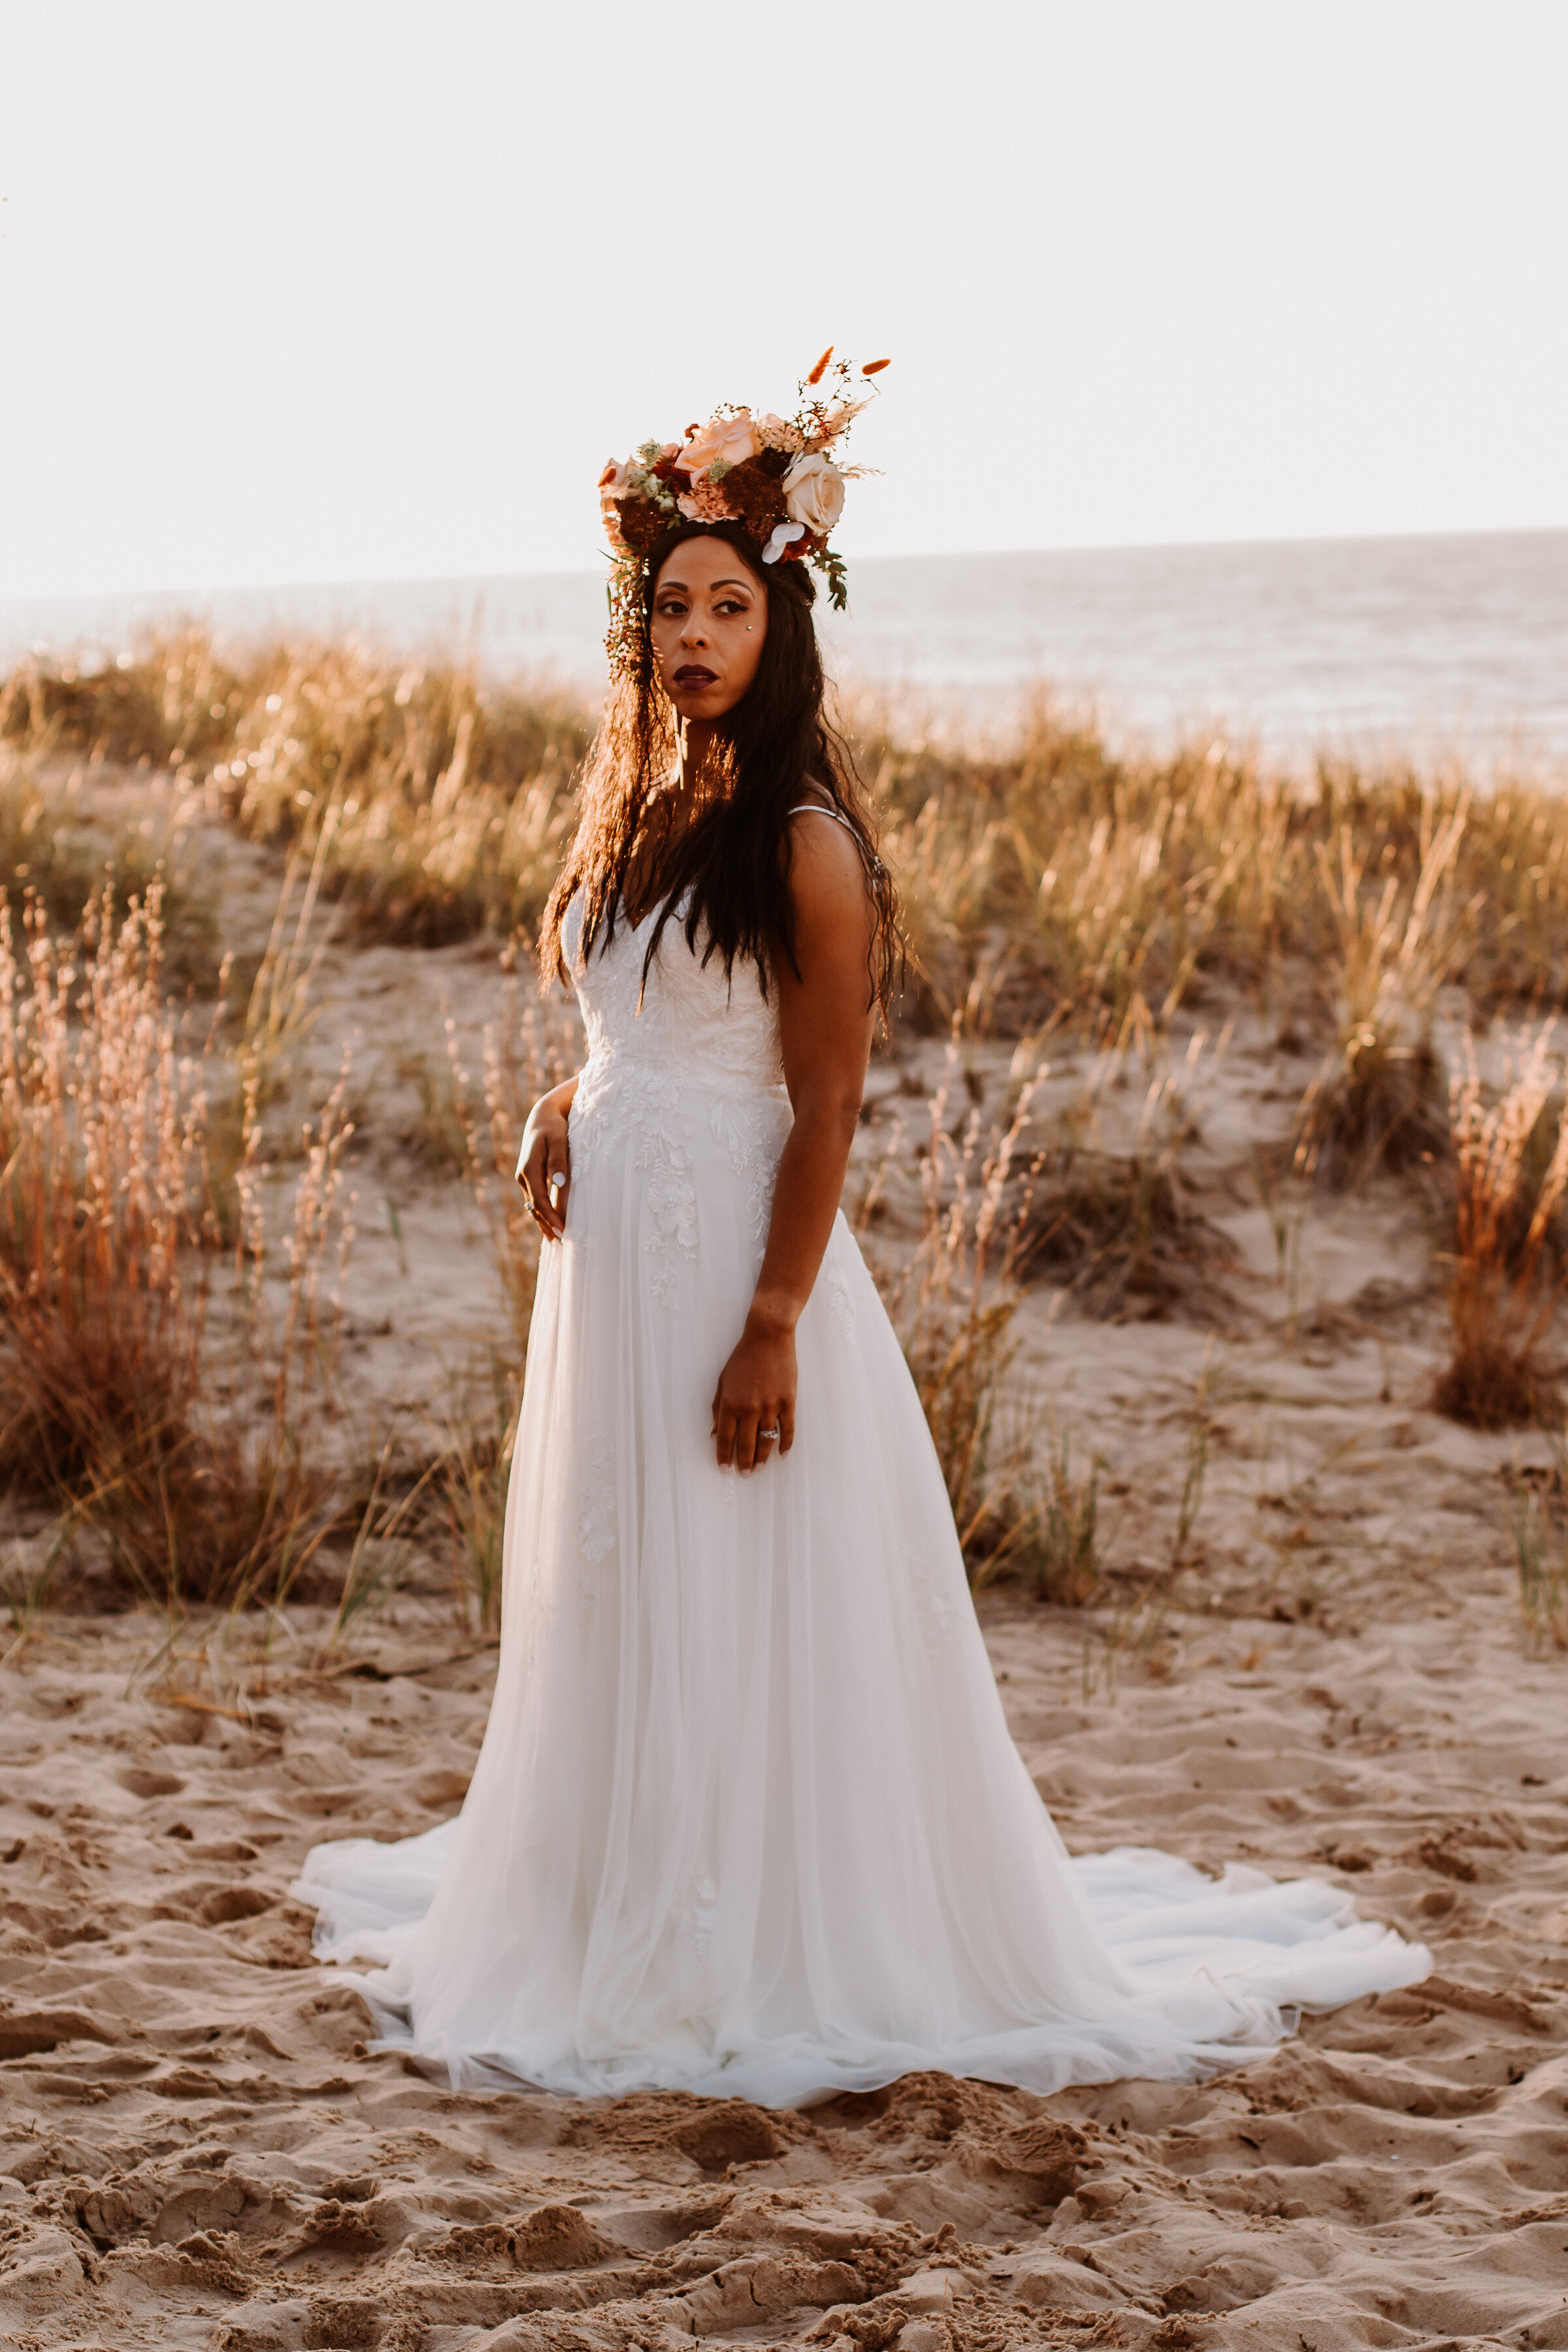  A stunning bohemian bride wearing an elaborate floral headpiece at an elopement styled shoot near Chesterton, Indiana. lake michigan bridal ensemble inspo boho bride floral crown bohemian flower crown adventurous beach wedding inspiration for midwes